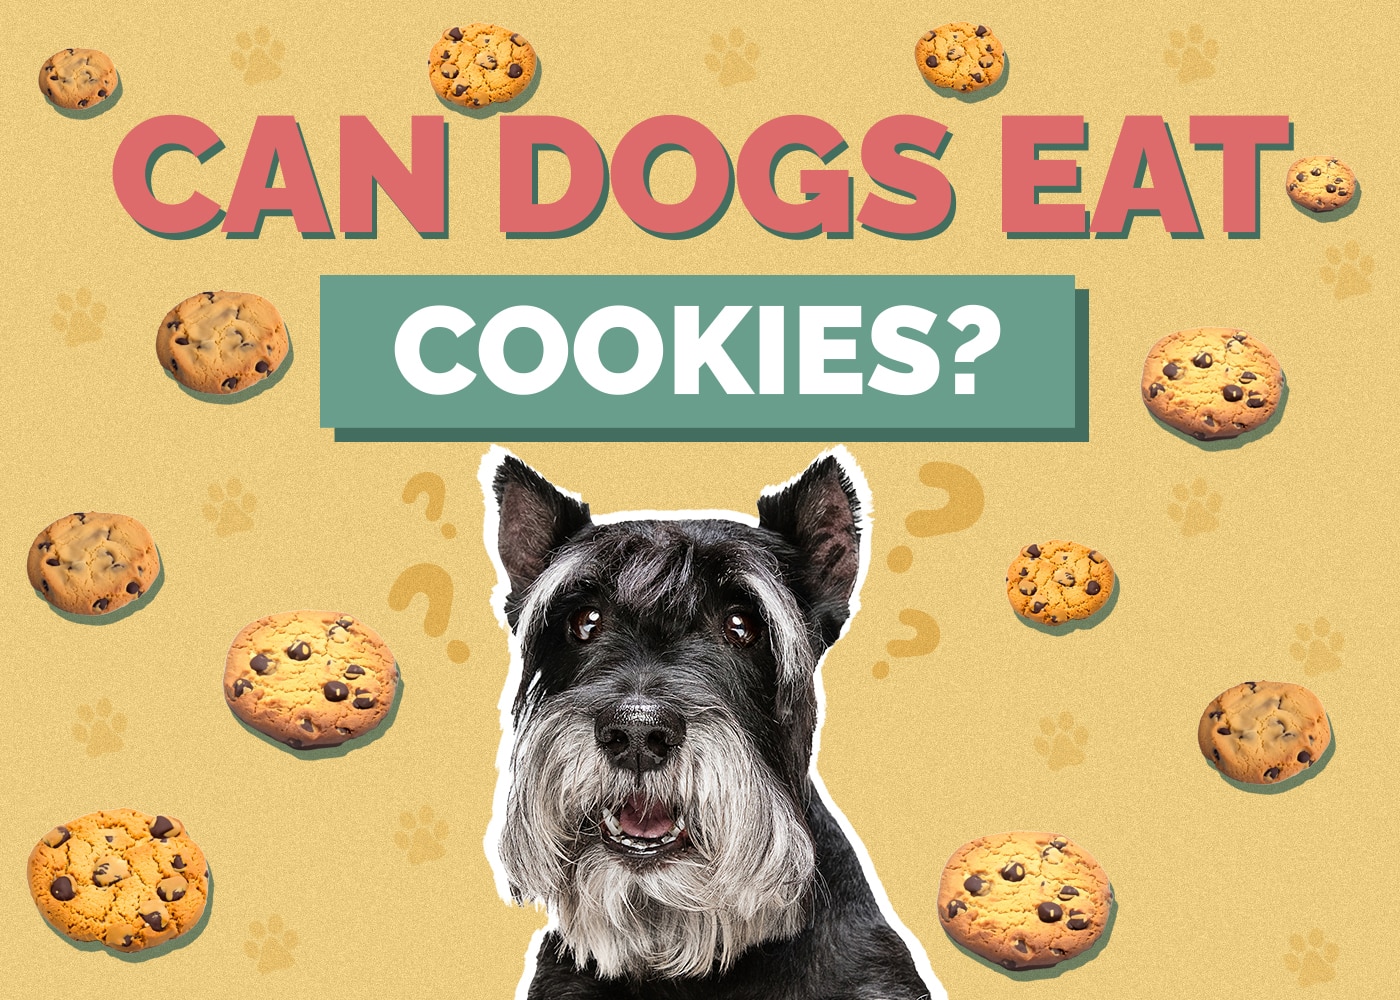 Can Dog Eat cookies